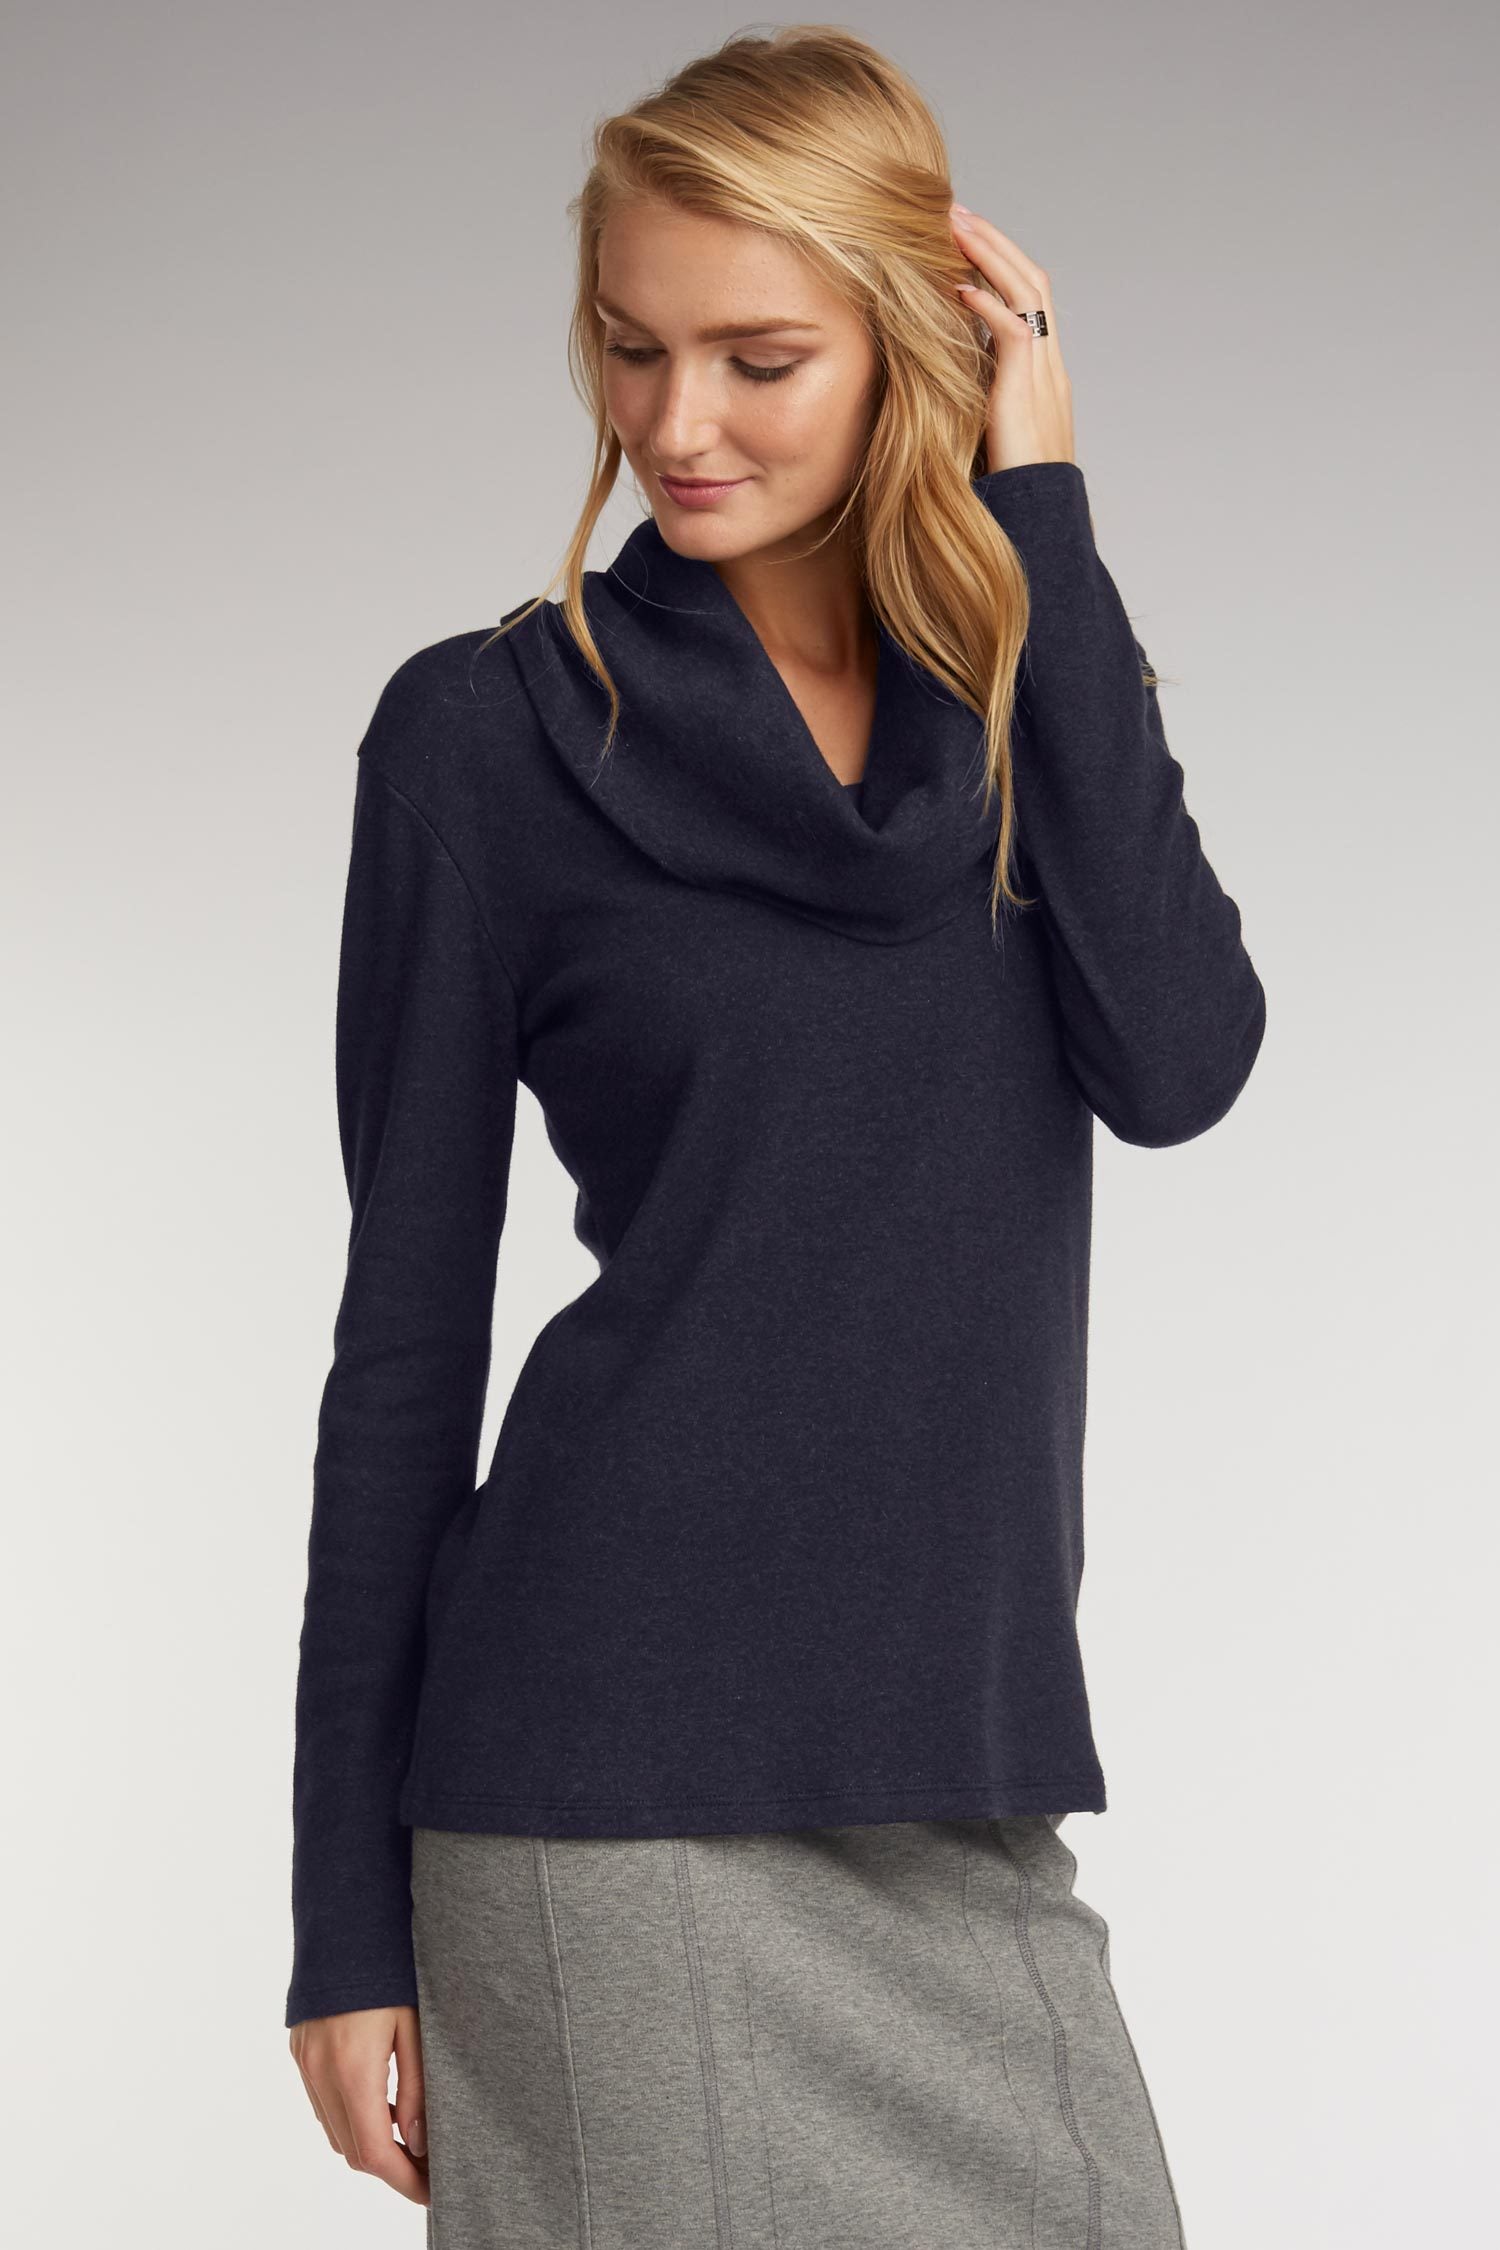 Womens Cowl Neck Top in Navy Blue Organic Cotton